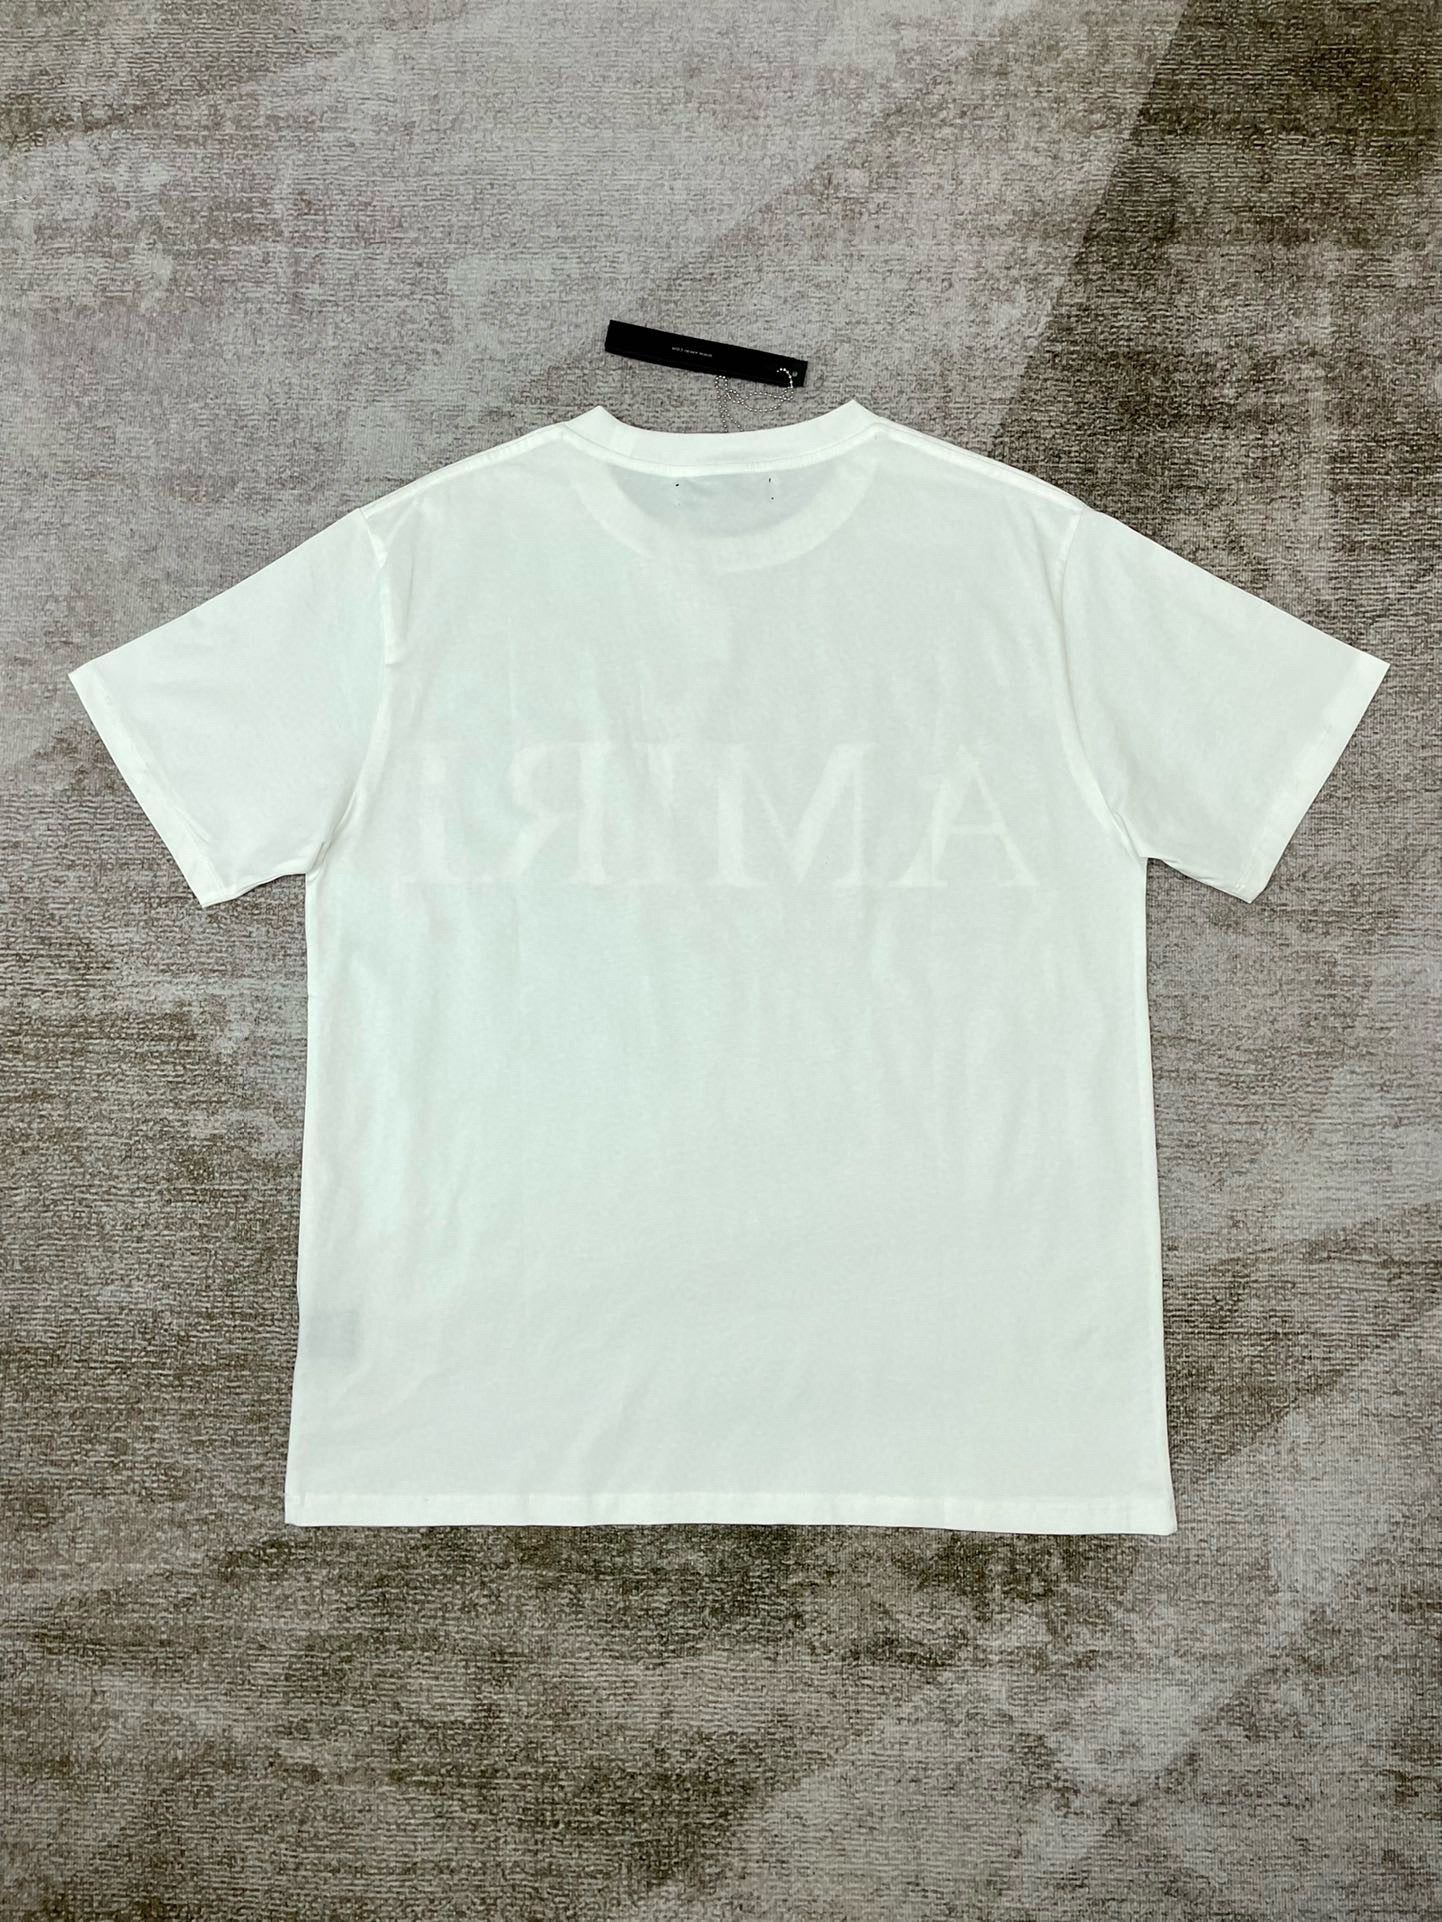 Sky blue and White T-shirt